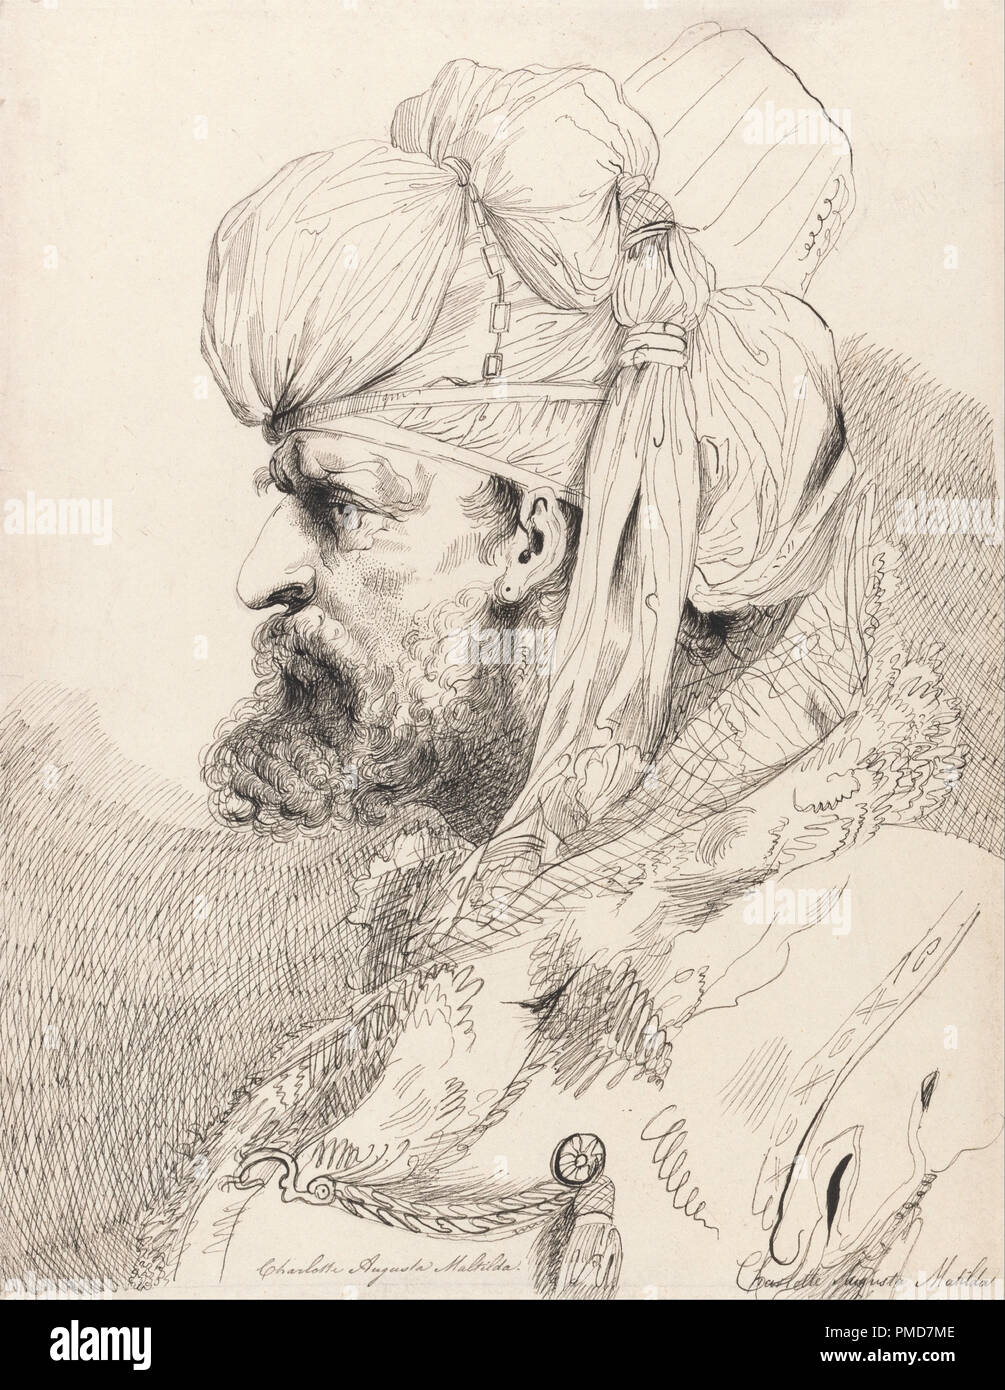 Head of an Aga of the Janisseries. Drawing. Pen and black ink on medium, slightly textured, cream wove paper. Height: 308 mm (12.12 in); Width: 241 mm (9.48 in). Author: after John Hamilton Mortimer. Princess Charlotte (later Queen Charlotte of Württemberg). Stock Photo